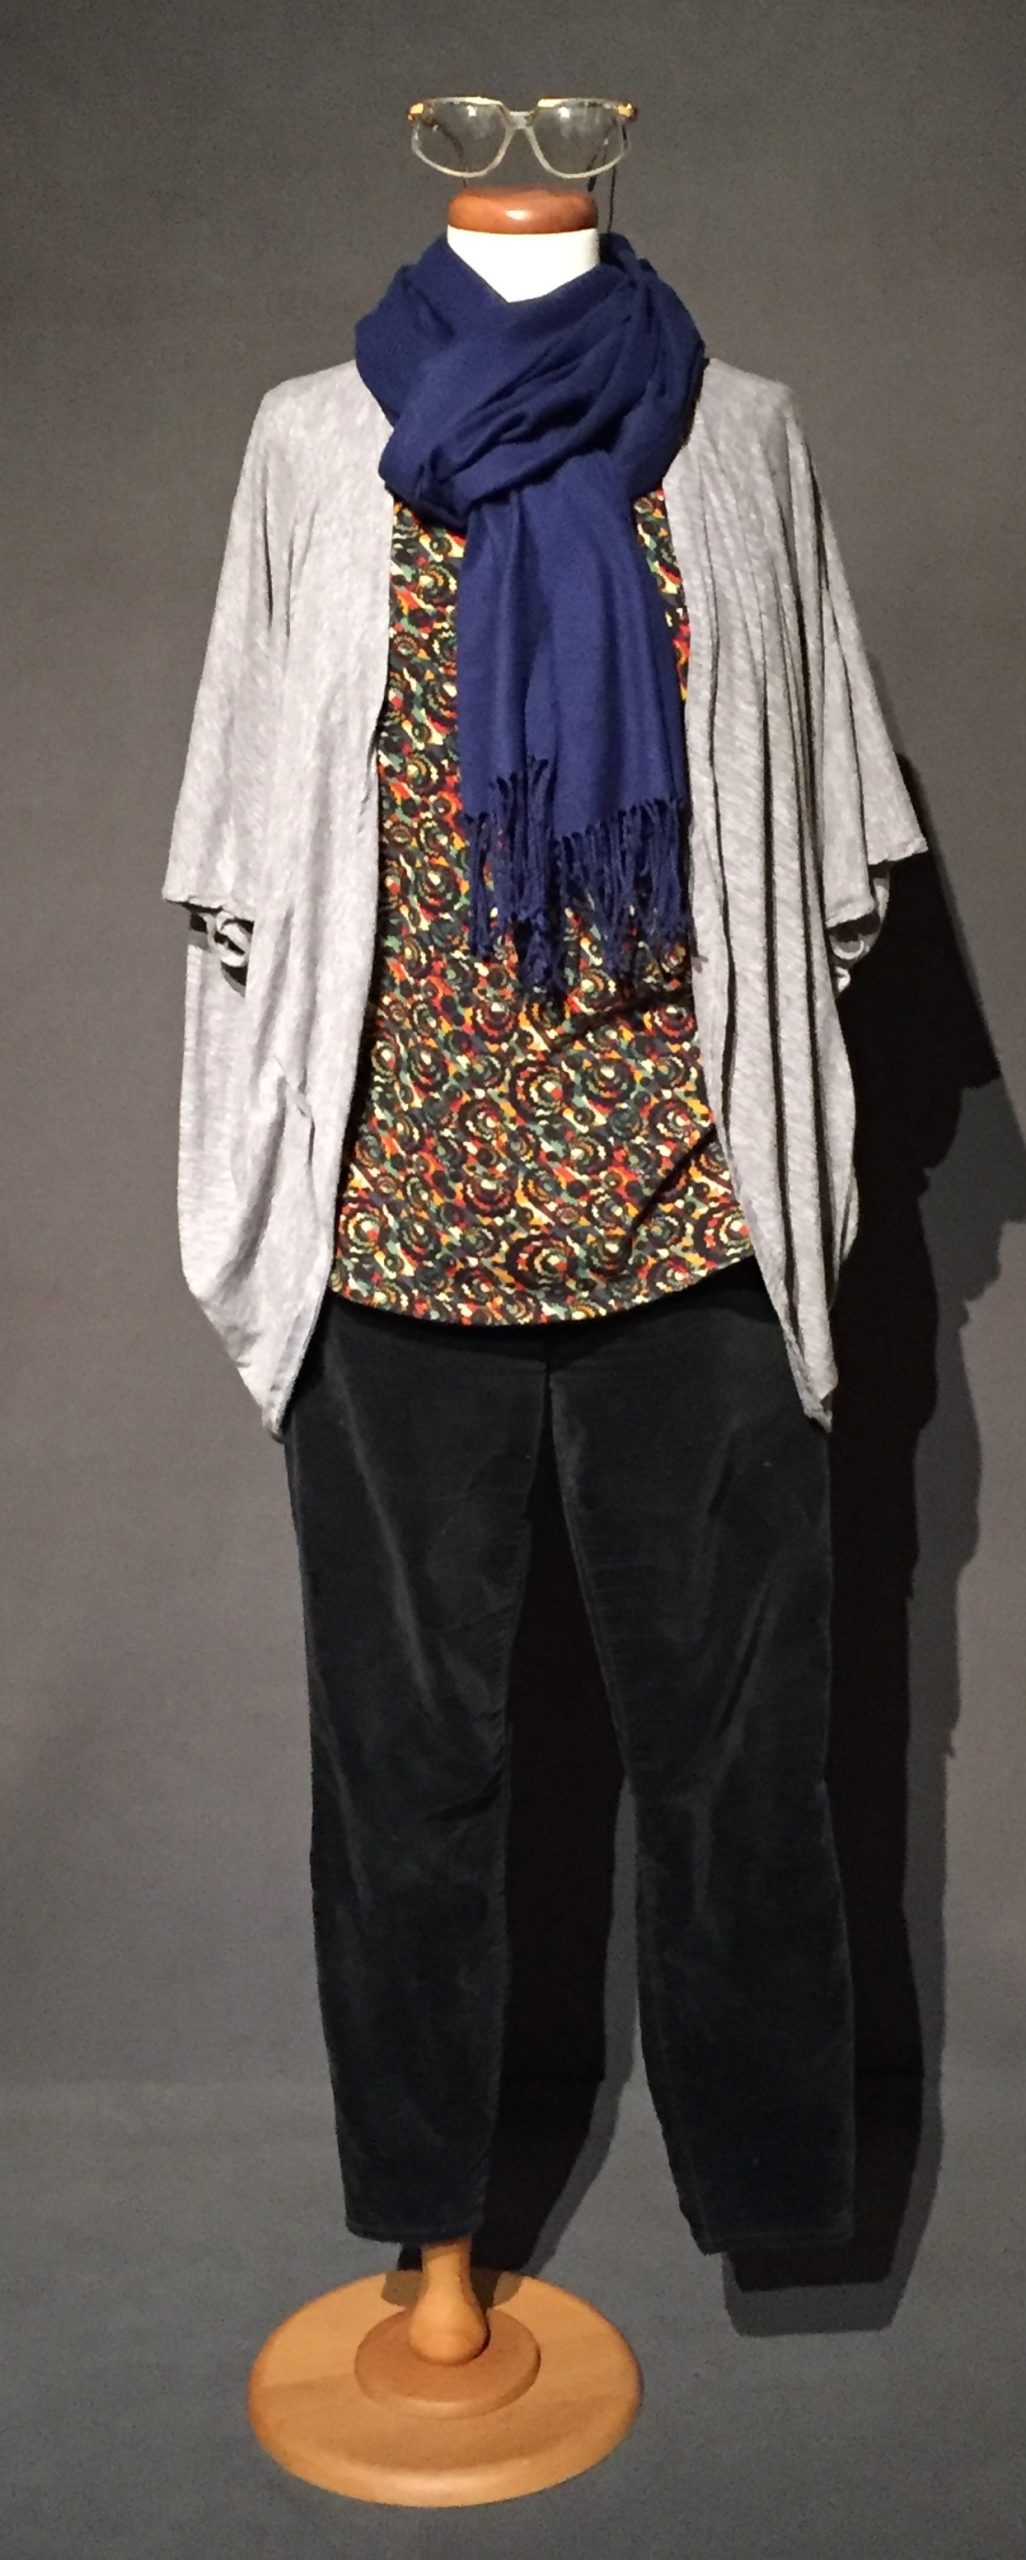 Heather gray cardigan, colorful floral top, blue scarf, and black corduroys